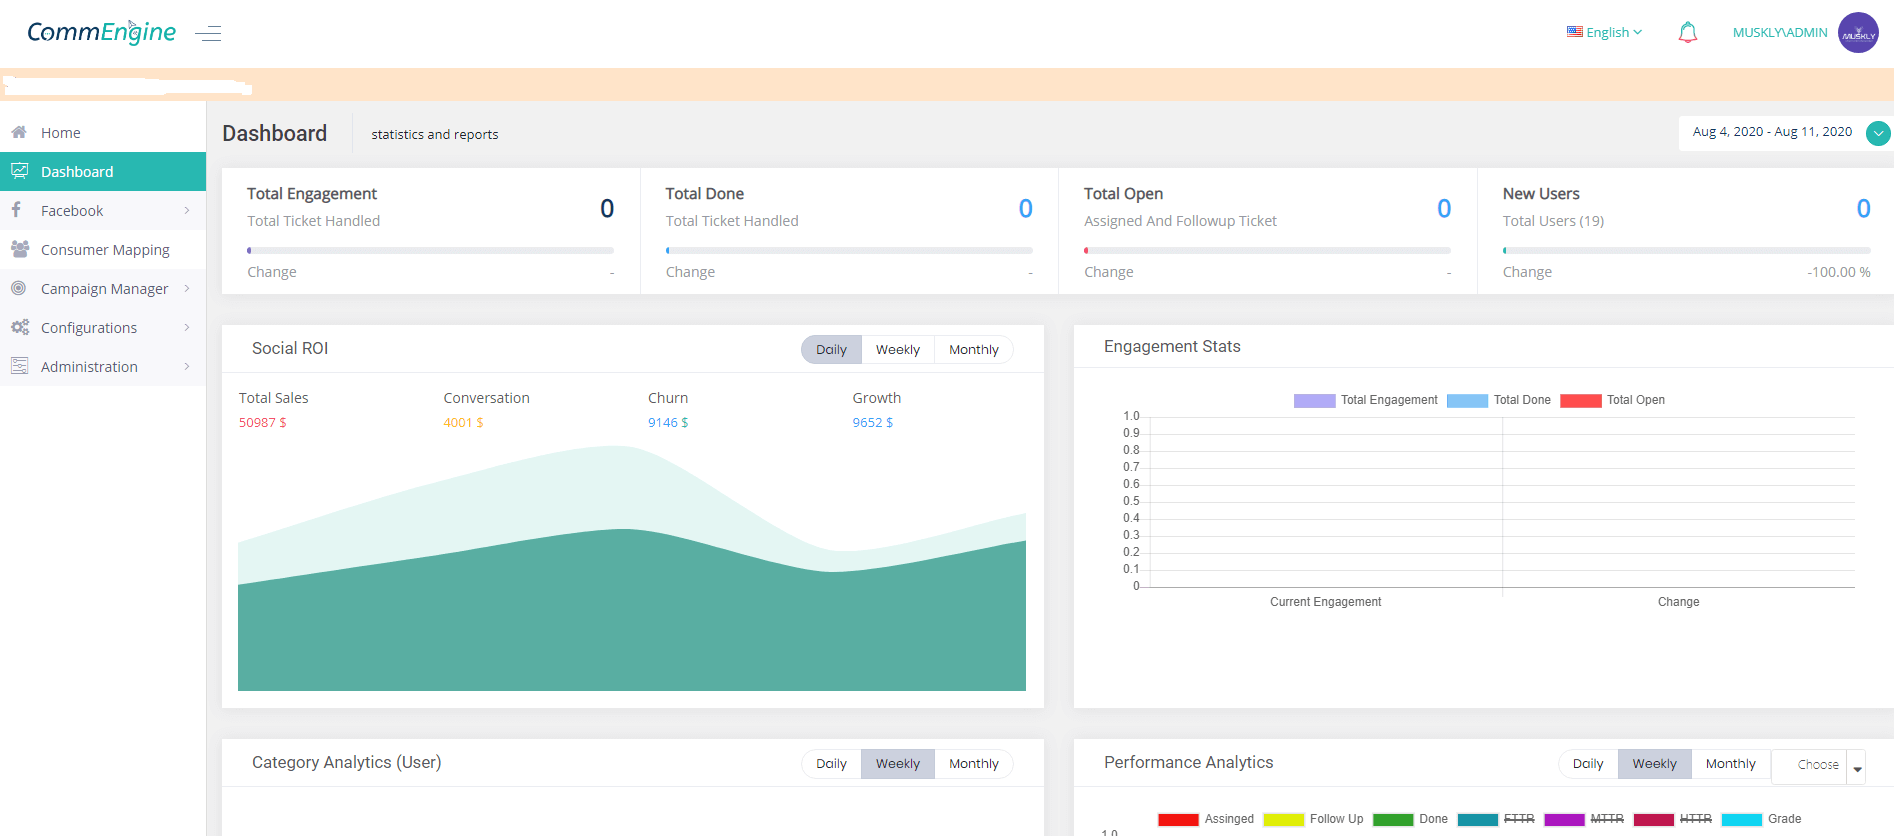 CommEngine-dashboard-view-and-a-review-by-MUSKLY-01